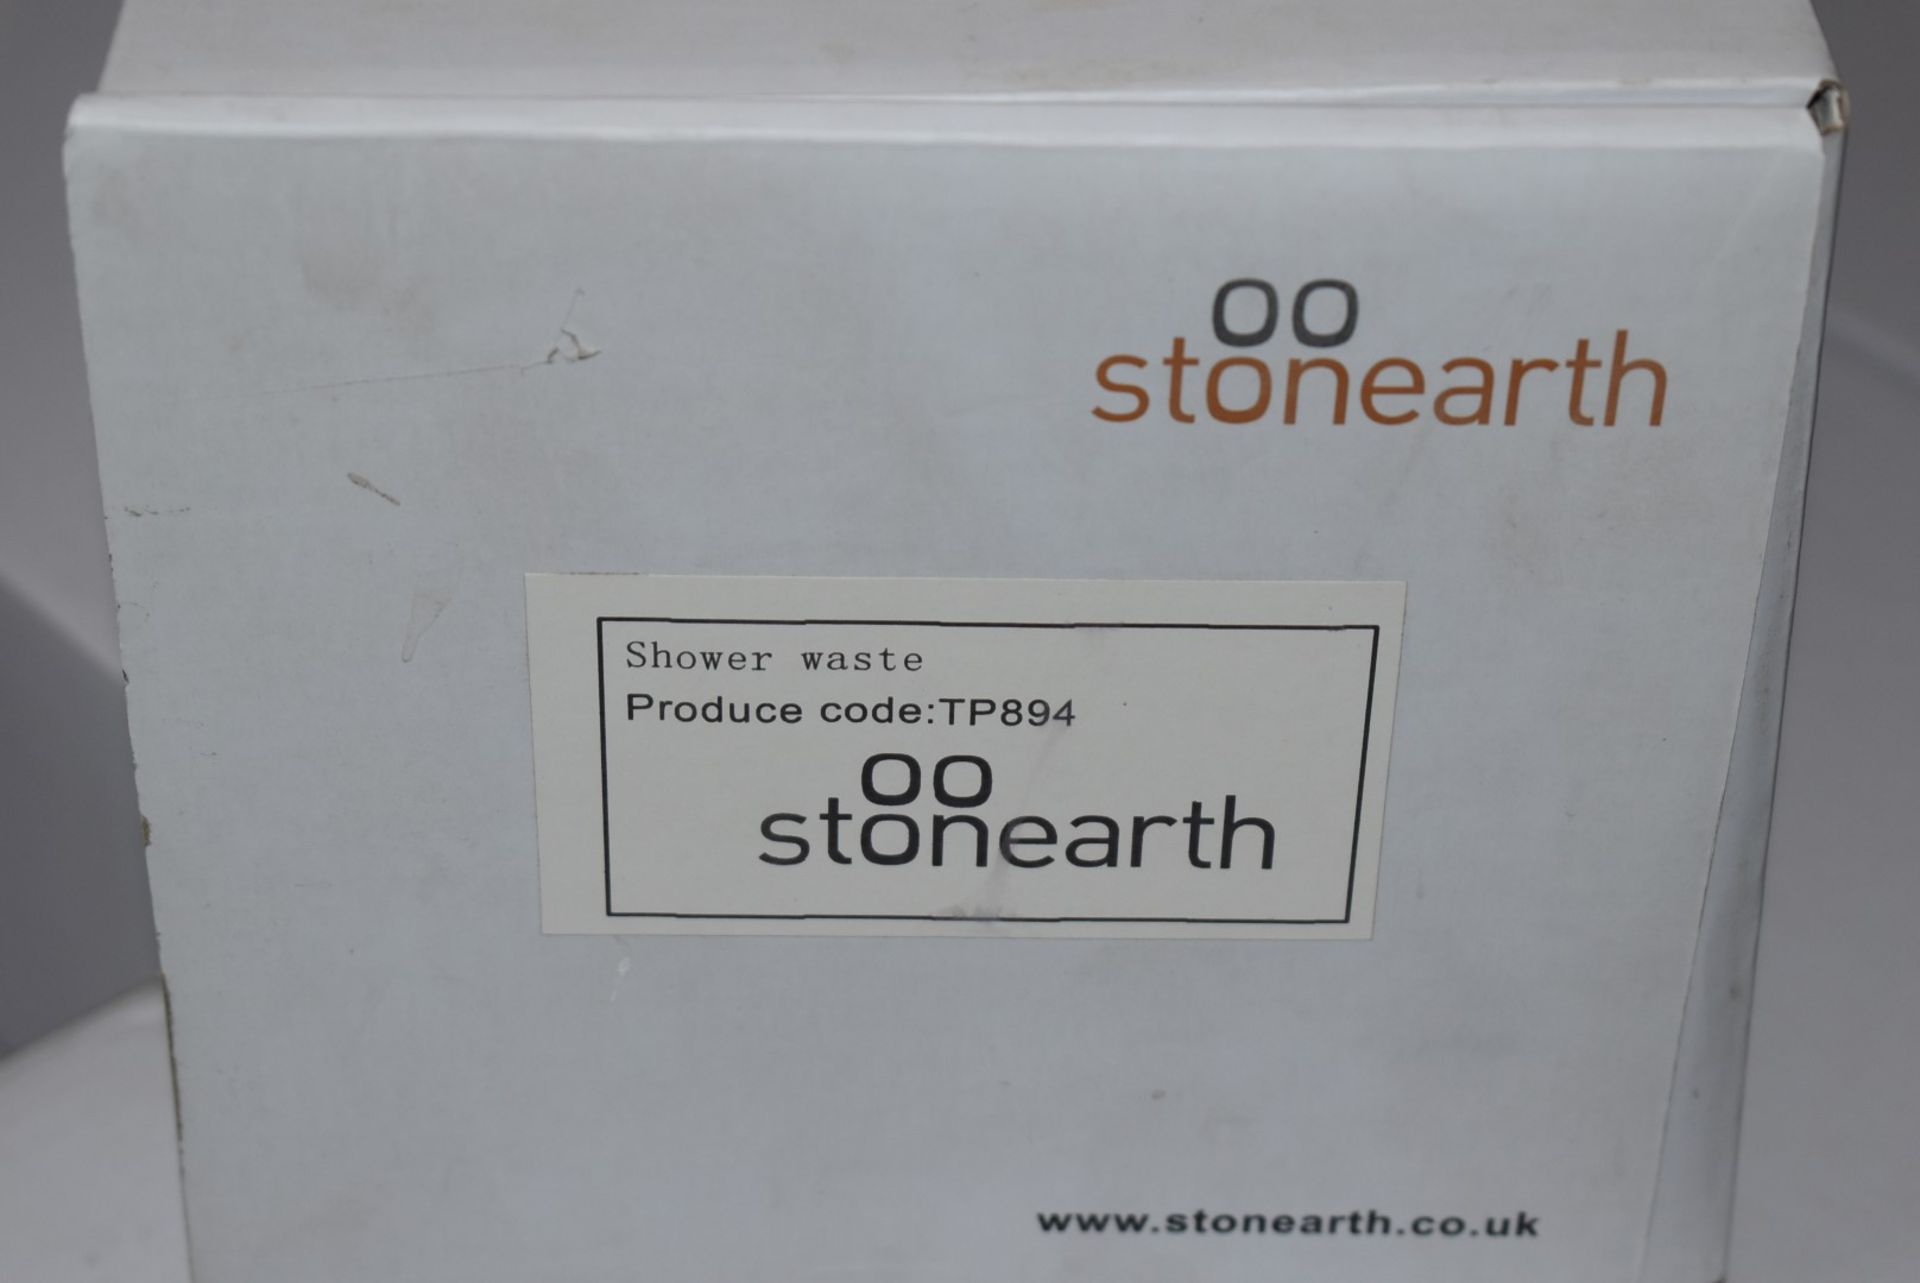 1 x Stonearth 'Metro' Stainless Steel Bath Filler Mixer Tap - Brand New & Boxed - RRP £340 - Ref: - Image 15 of 15